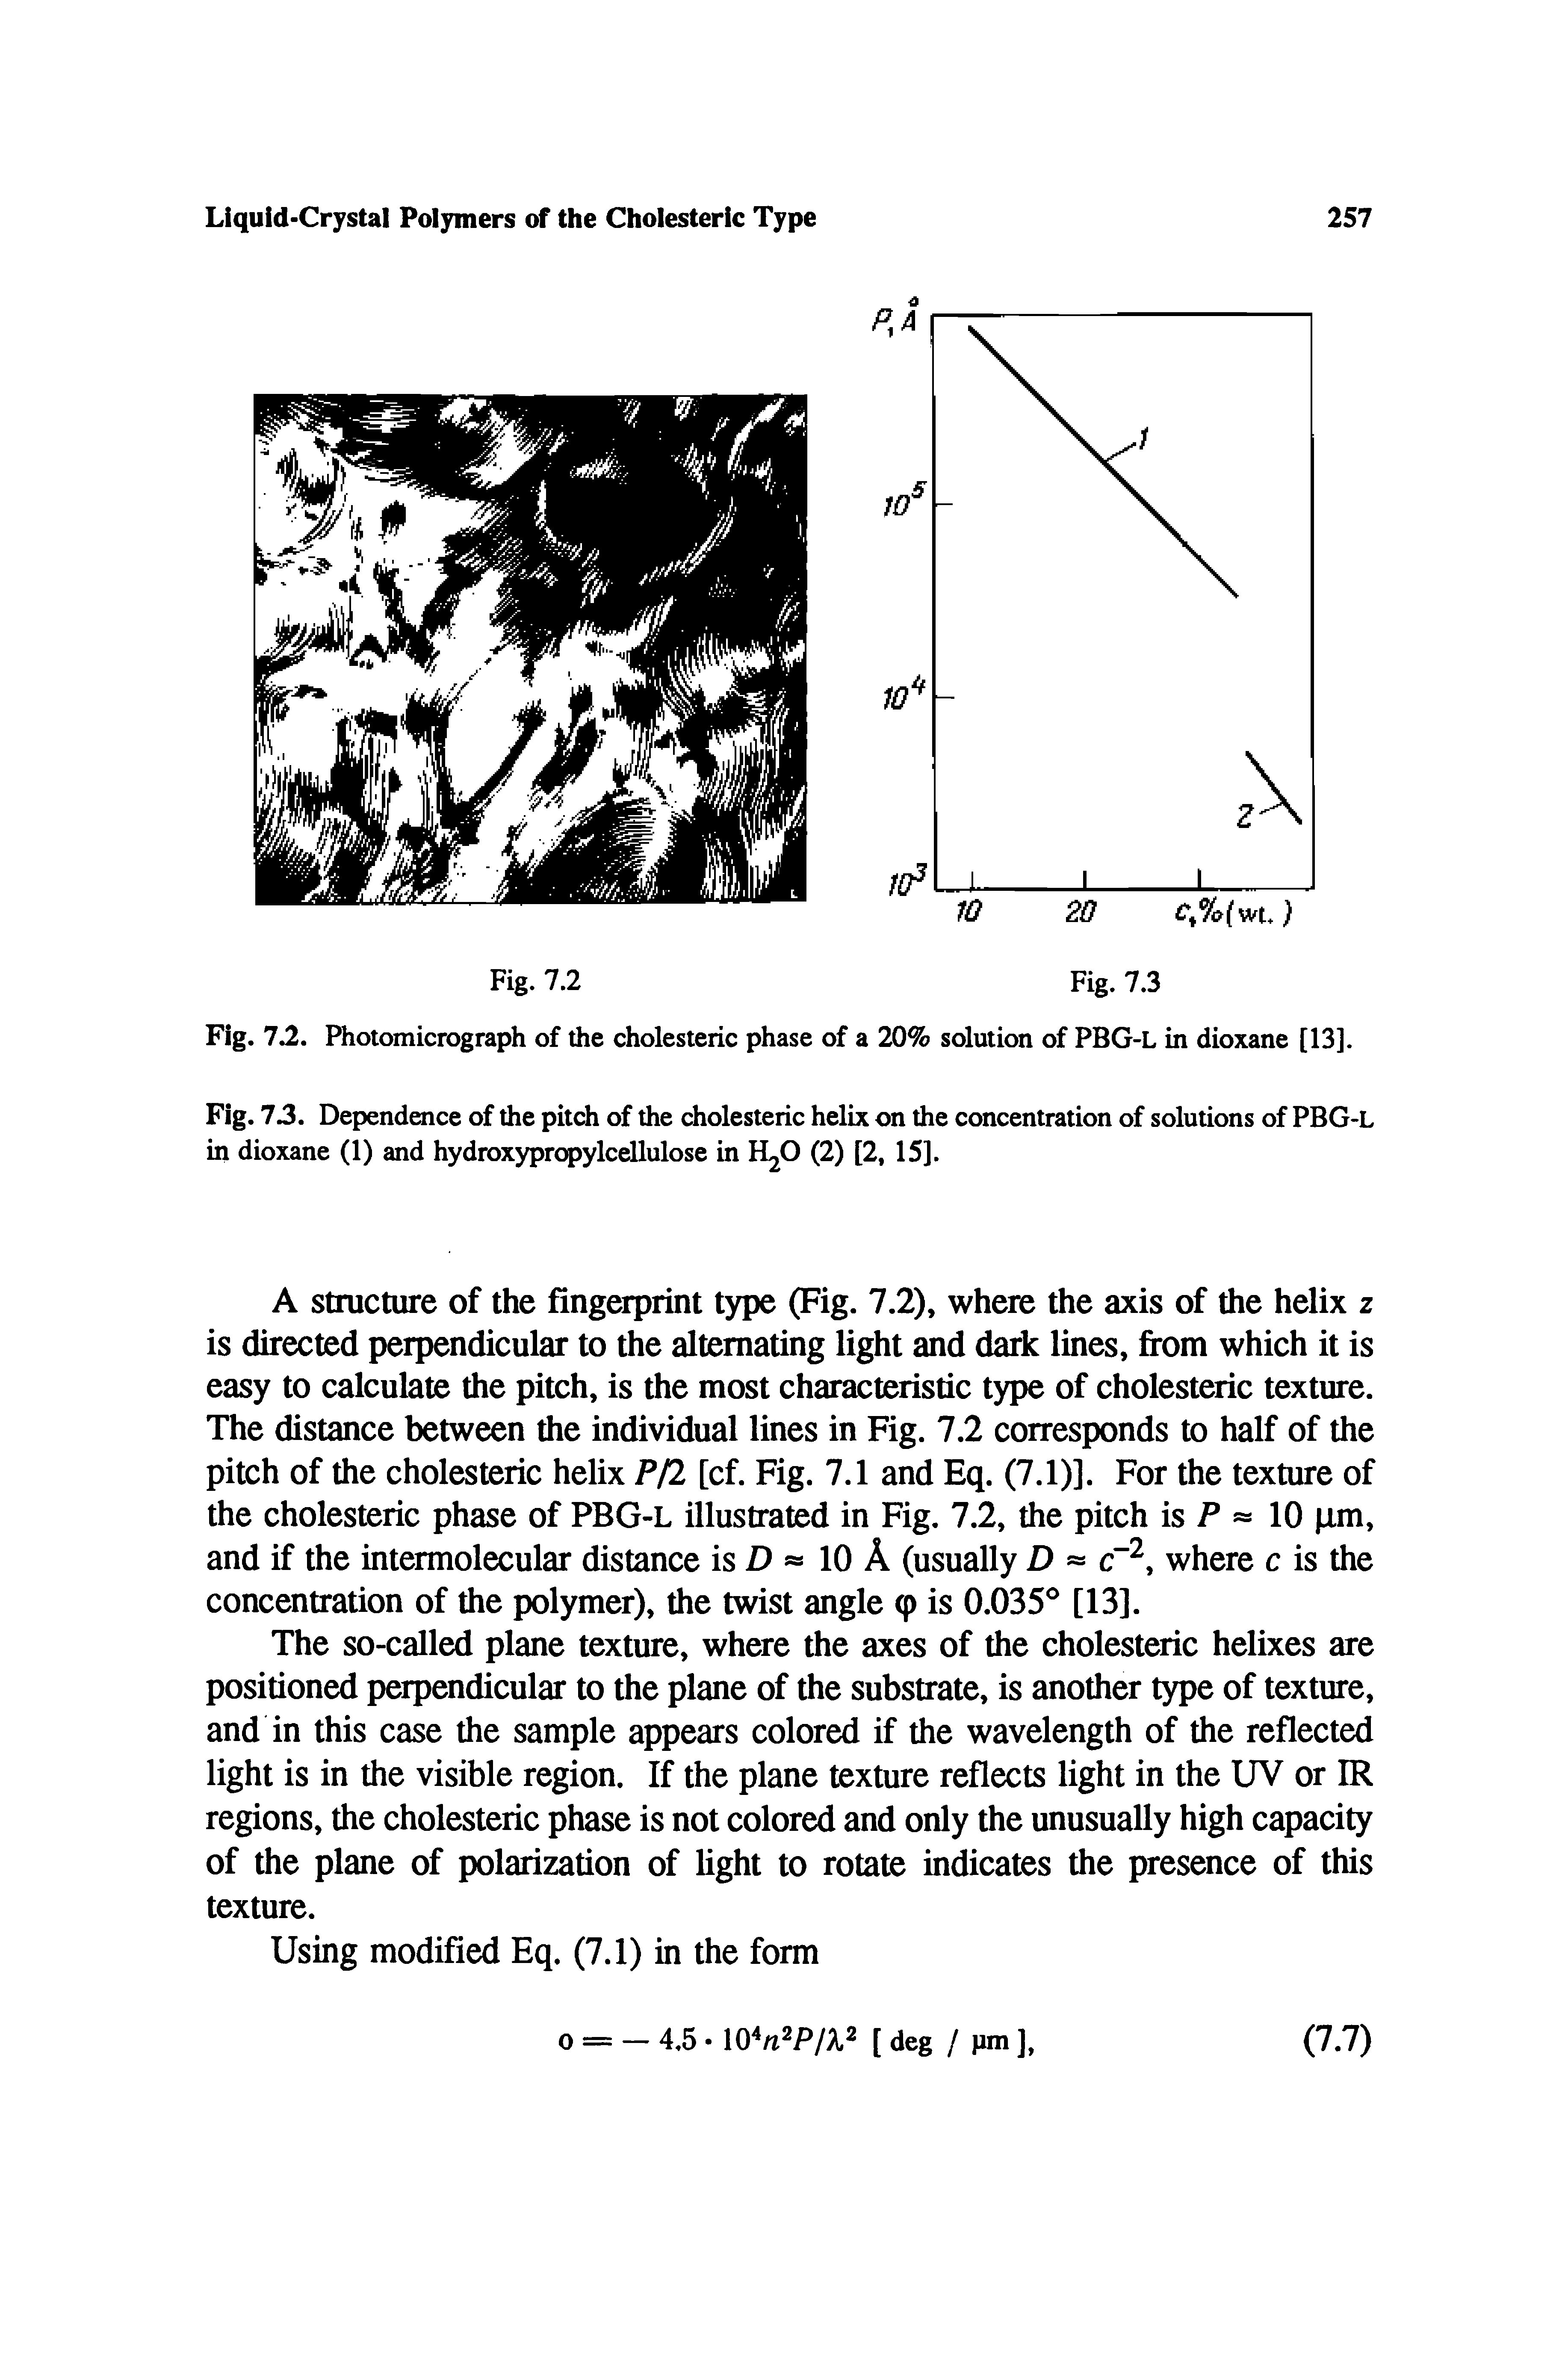 Fig. 73. Dependence of the pitch of the cholesteric helix on the concentration of solutions of PBG-L in dioxane (1) and hydroxypropylcellulose in H2O (2) [2, 15].